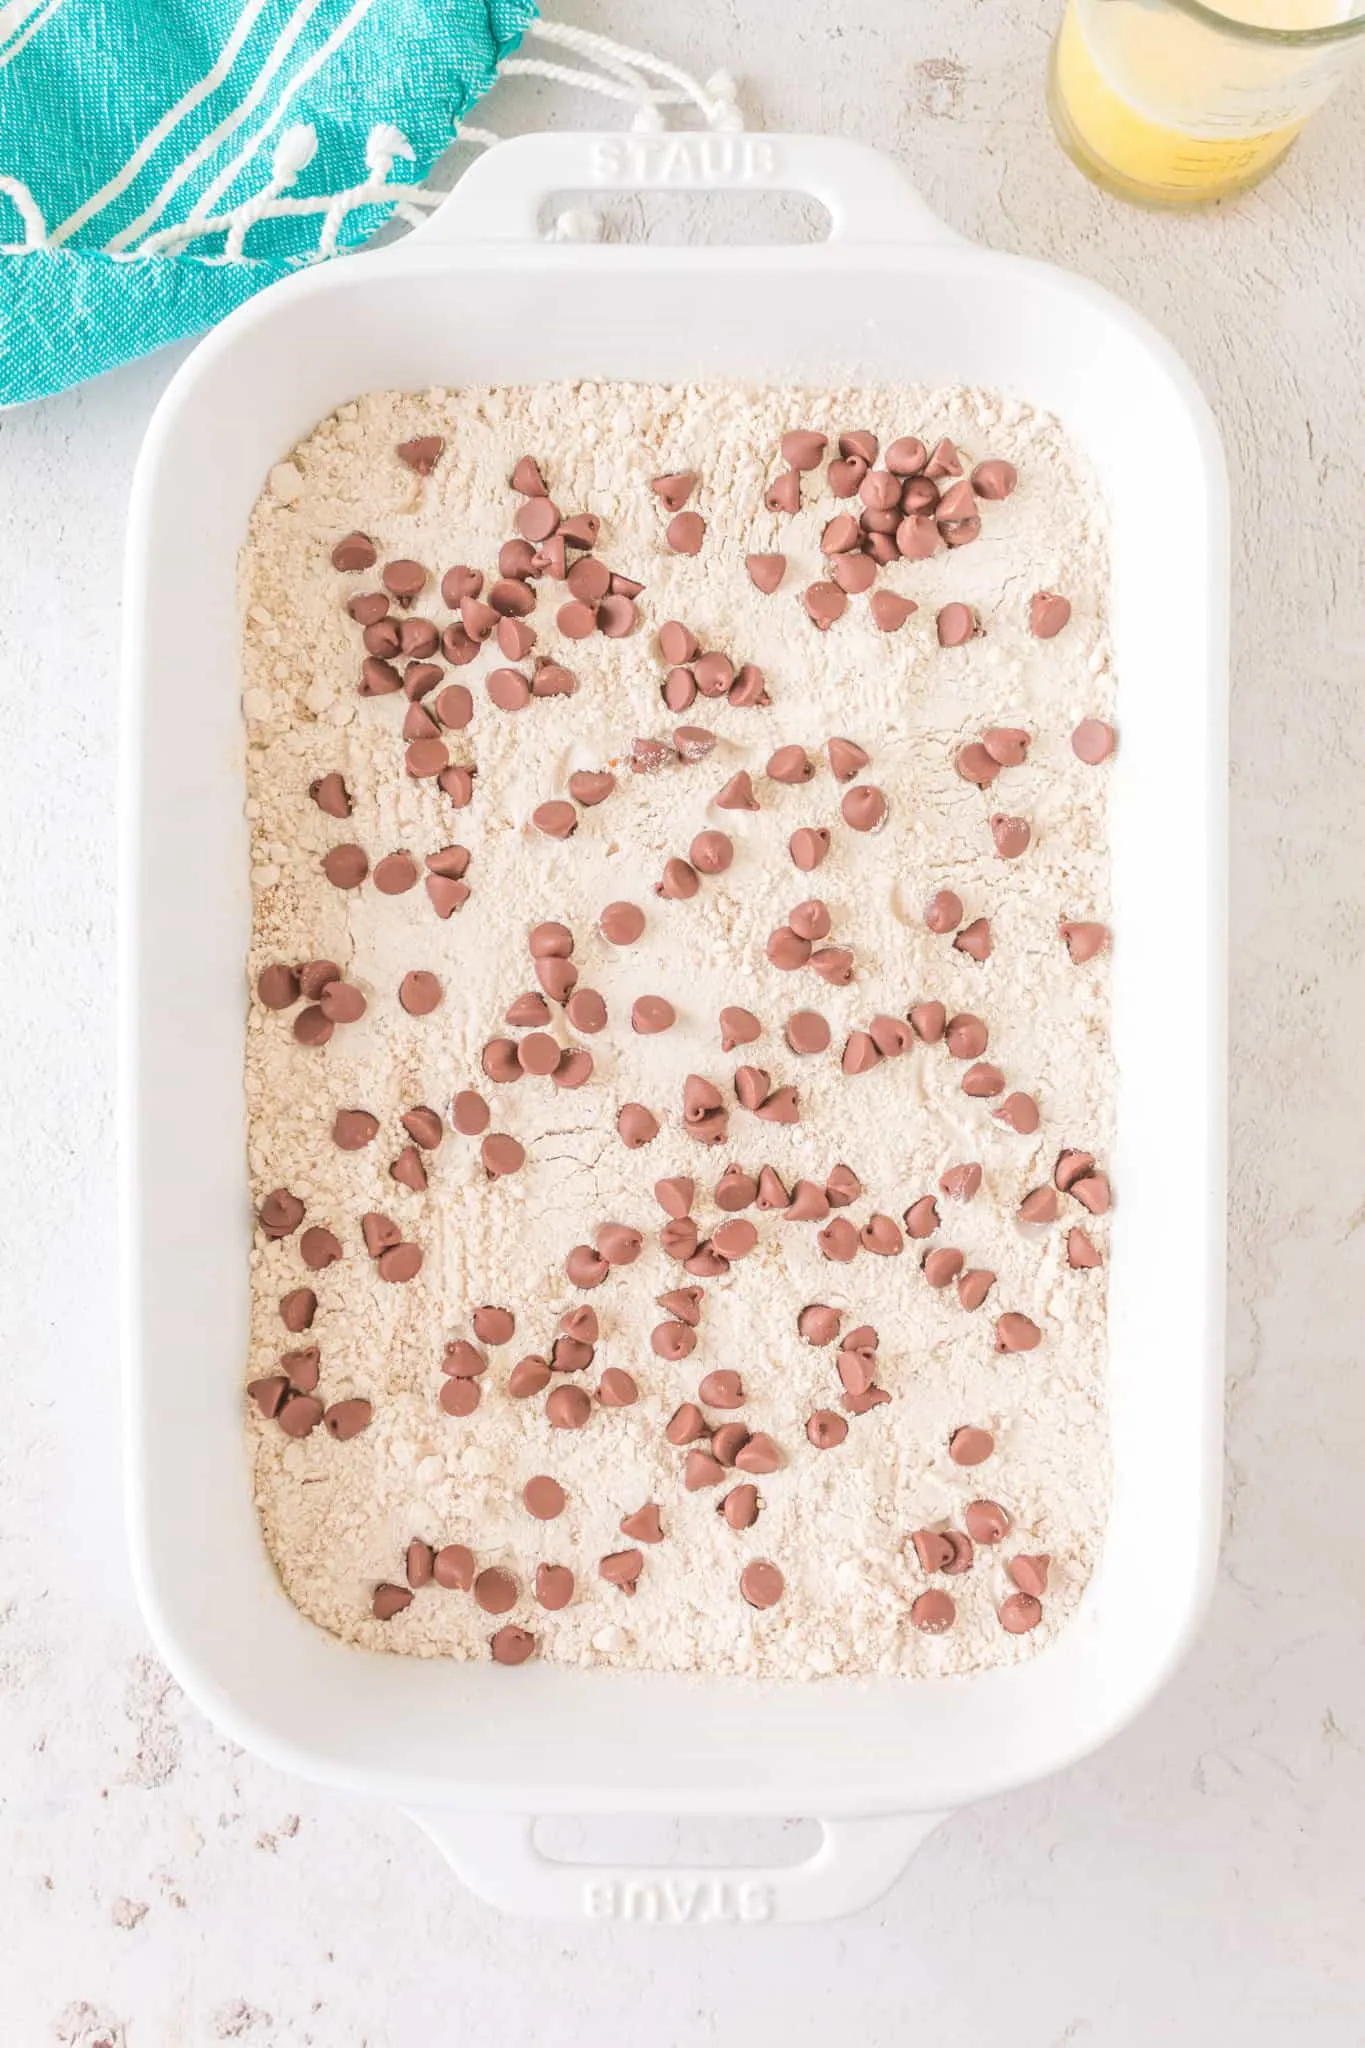 milk chocolate chips on top of spice cake mix in a baking dish